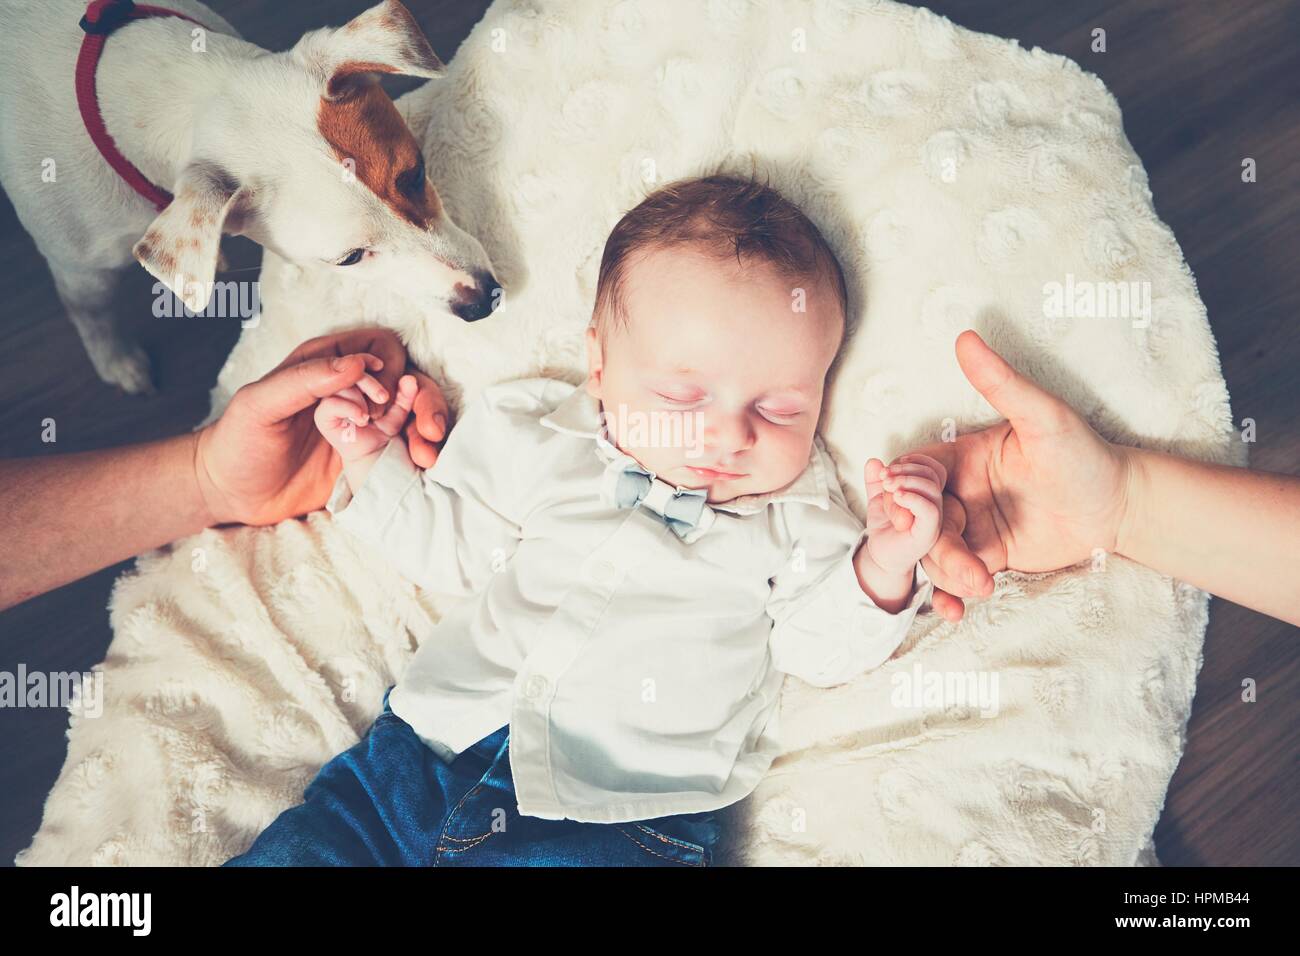 Touch of the family. Hands of parents and their baby in the bed. Dog watching the sleeping boy. Stock Photo